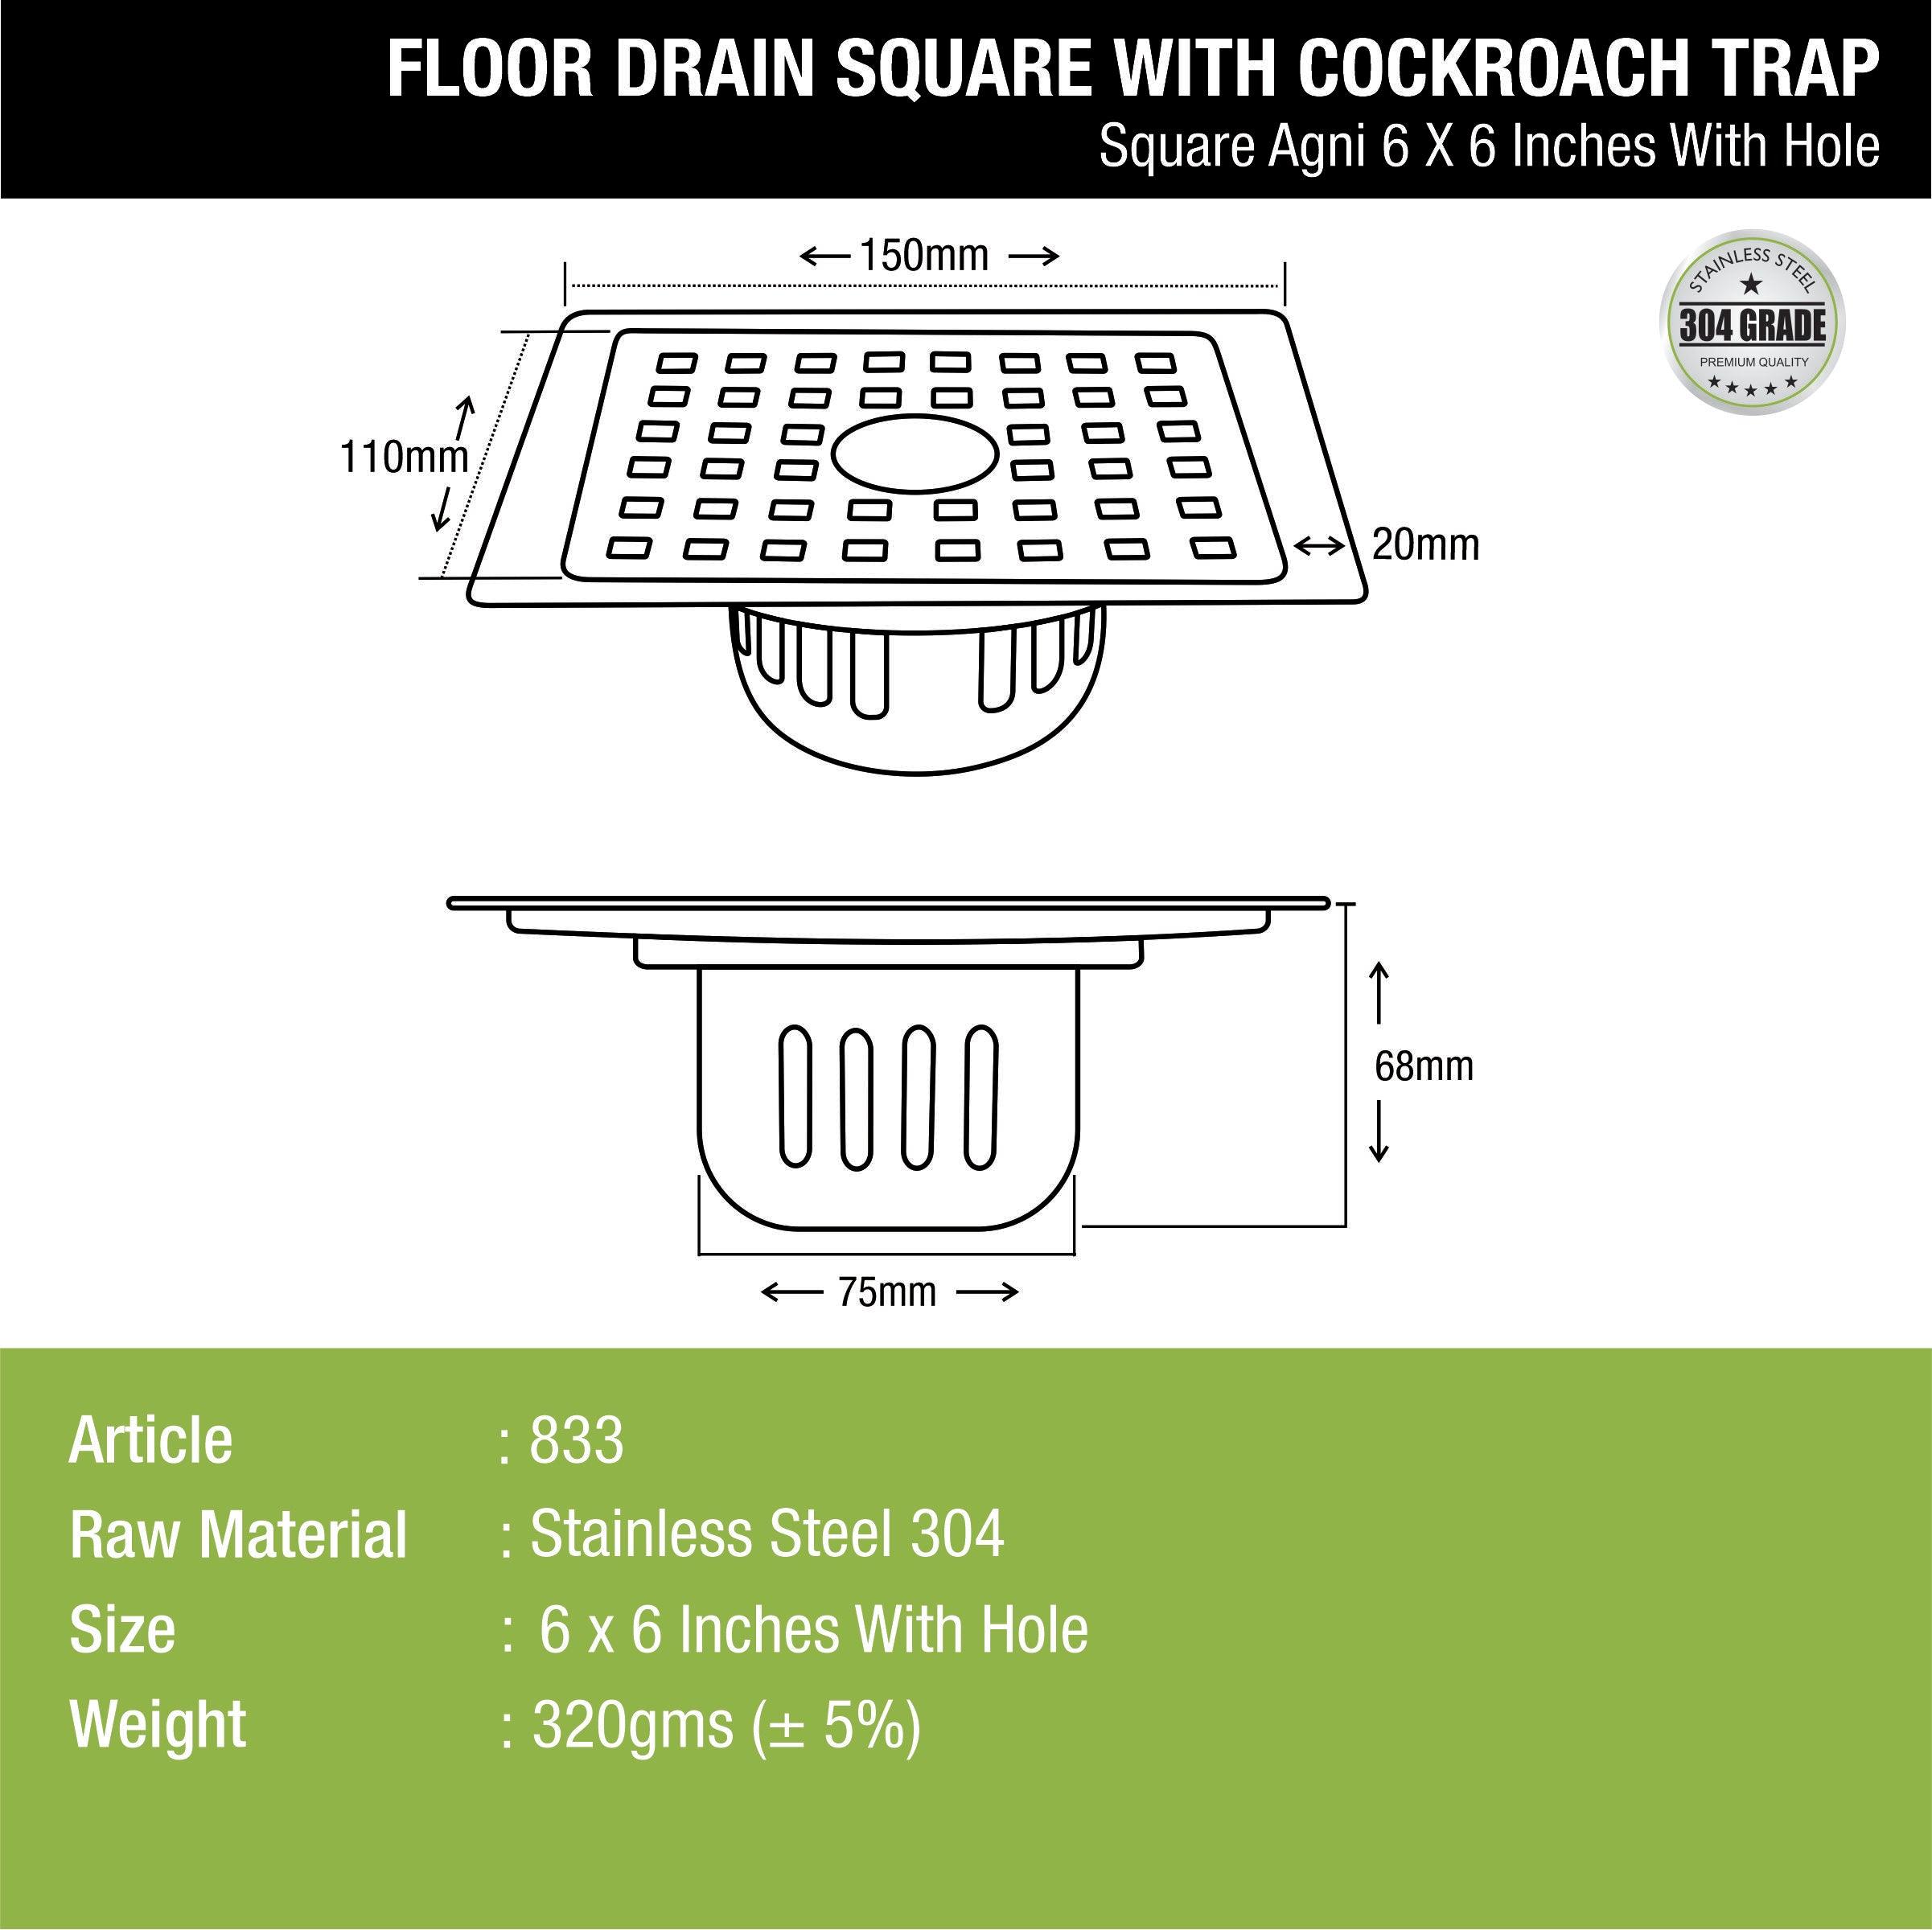 Agni Square Floor Drain (6 x 6 Inches) with Hole and Cockroach Trap- LIPKA - Lipka Home